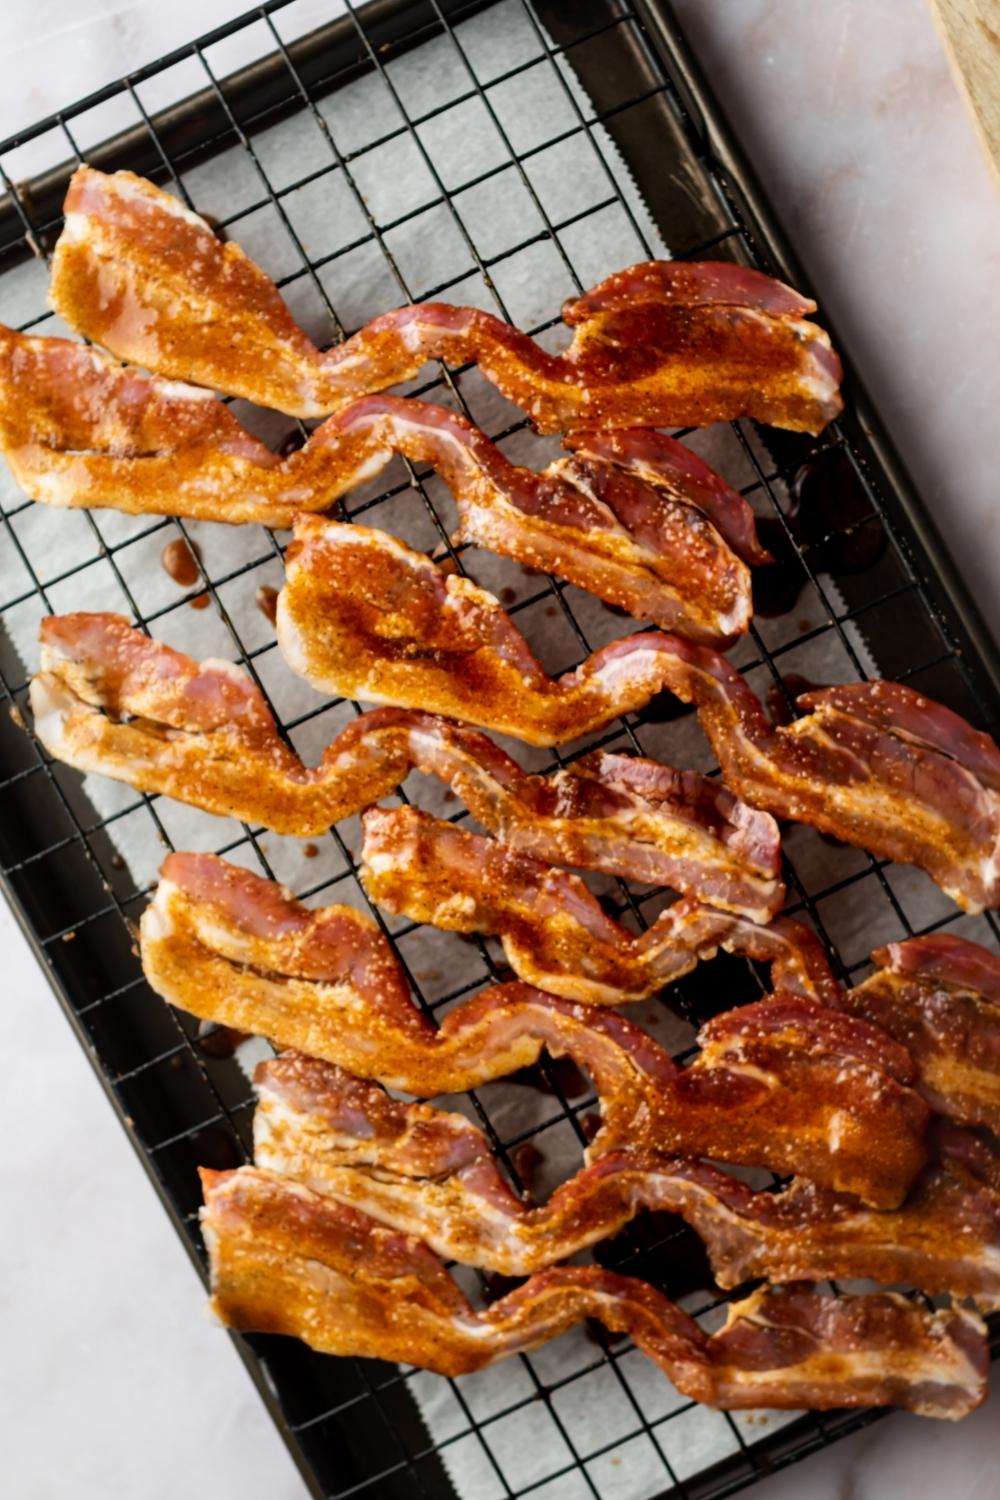 Eight slices of million Dollar bacon on a wire rack on a baking sheet lined with parchment paper.